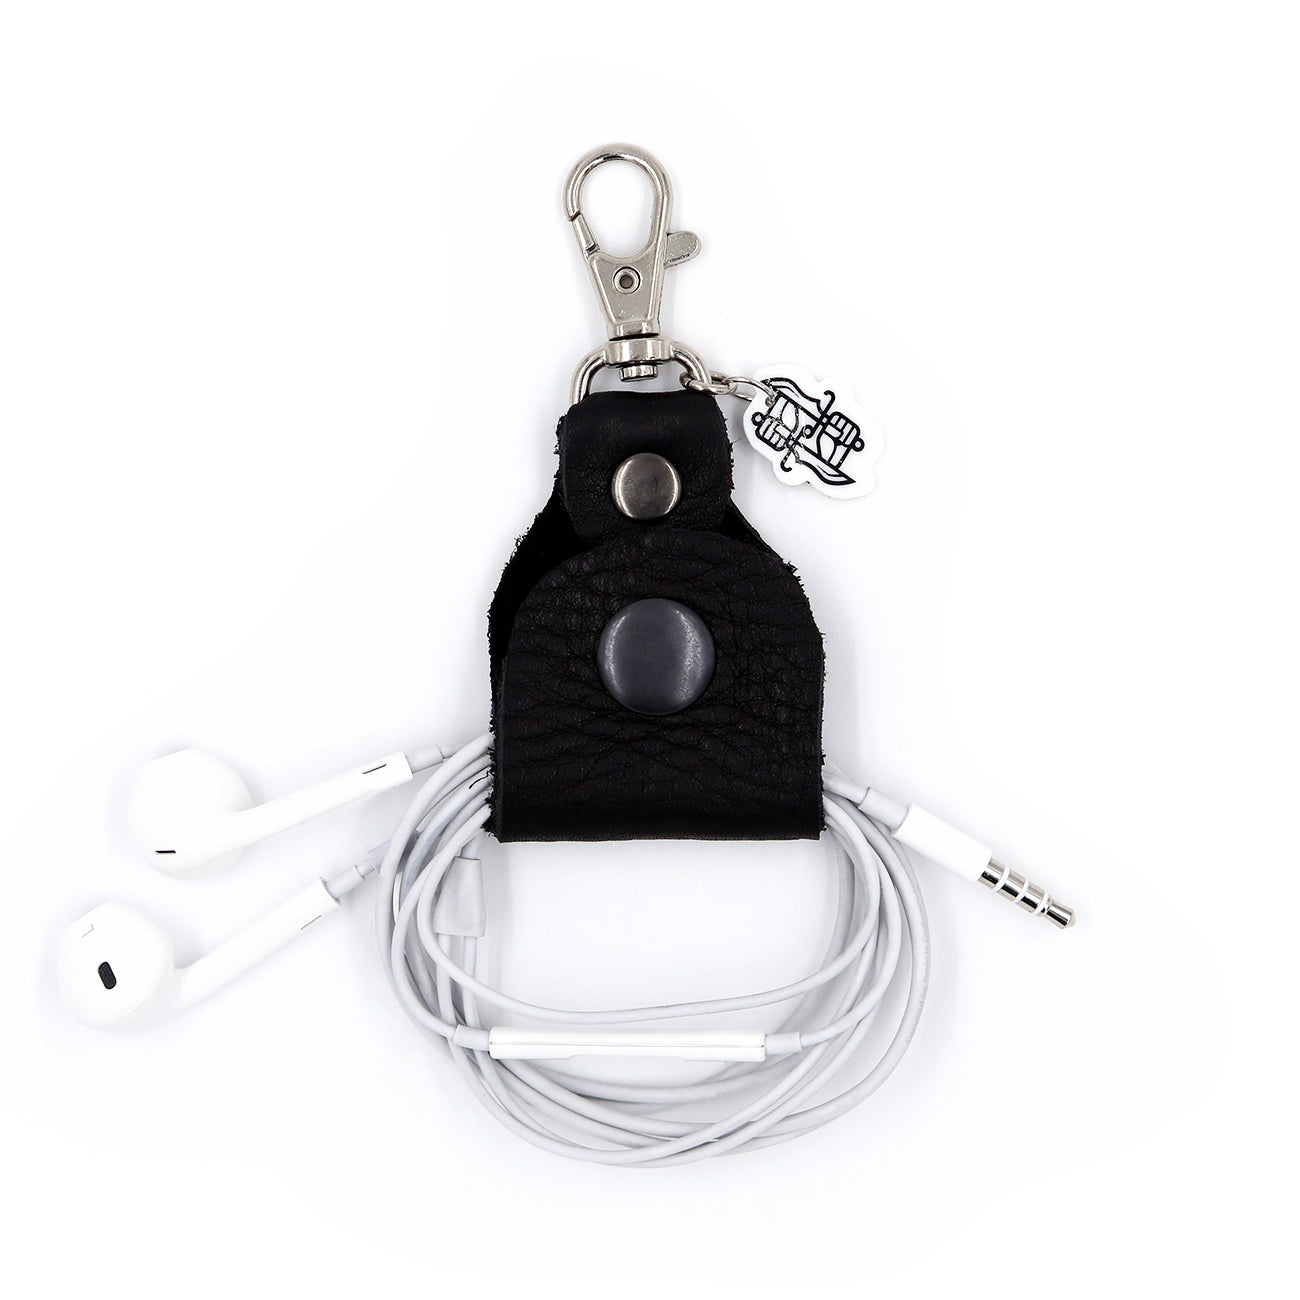 Black leather headphone keepers with Dual Wield Studio logo and silver clasp holding white aux headphones on white background.